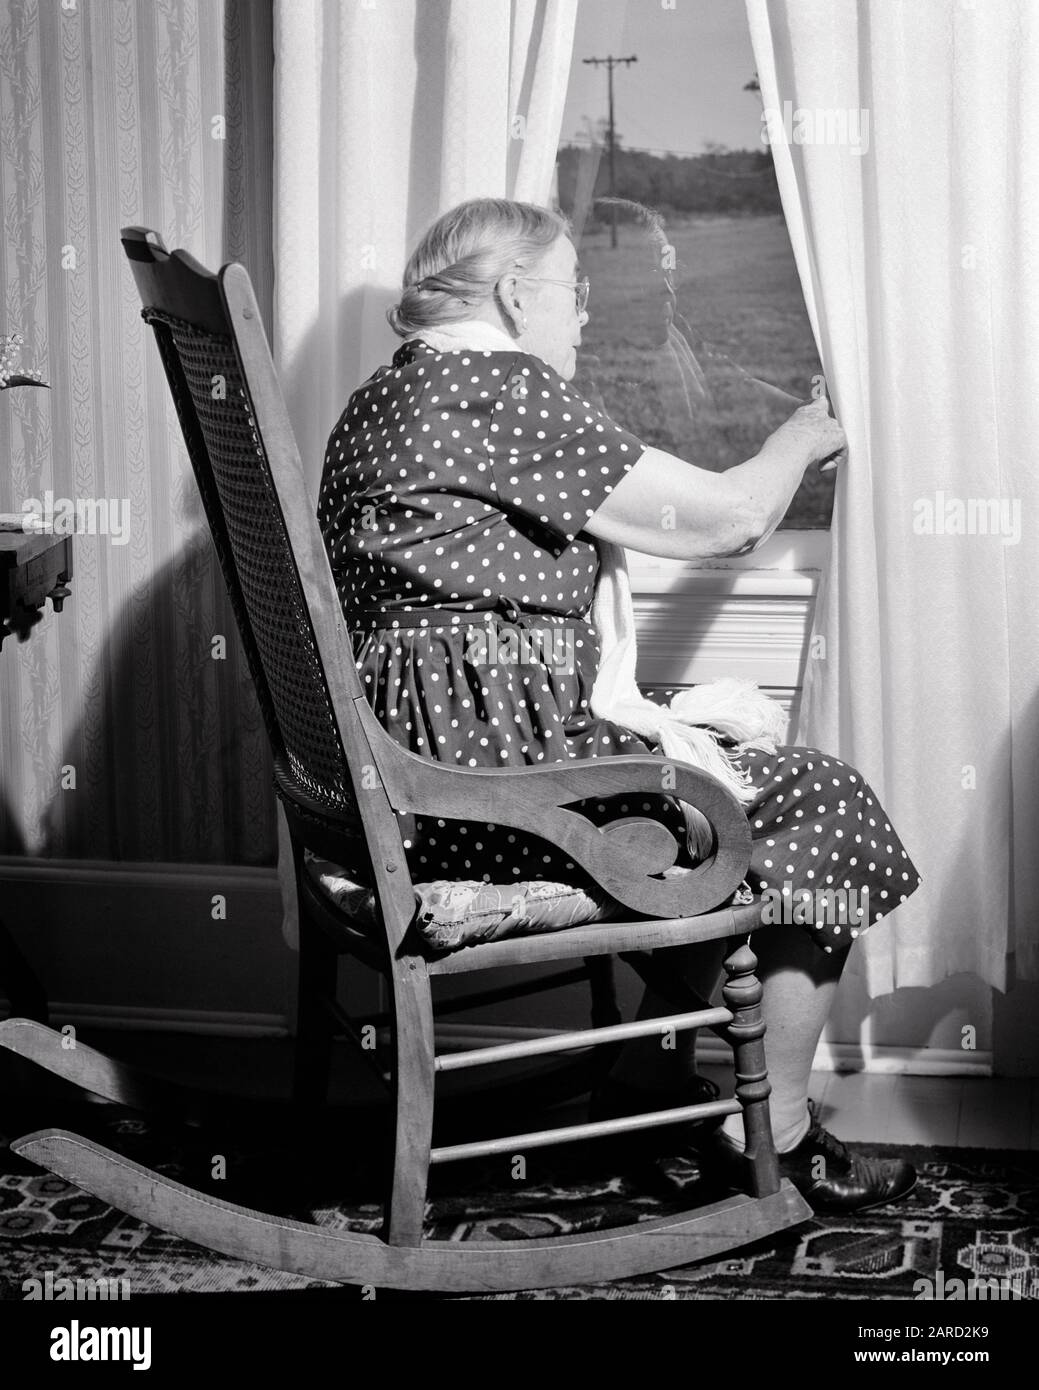 1960s SENIOR WOMAN SITTING IN ROCKING CHAIR BY WINDOW LOOKING OUT FOR ANTICIPATED VISITOR OR NOSEY BIDDY SPYING ON NEIGHBORS - s14450 CRS001 HARS ROCKING INFORMATION LIFESTYLE ELDER FEMALES MOODY RURAL HOME LIFE COPY SPACE FULL-LENGTH LADIES PERSONS CARING ENTERTAINMENT SENIOR ADULT TROUBLED B&W SADNESS SENIOR WOMAN NEIGHBORS OLD AGE OLDSTERS OLDSTER DISCOVERY HOPE AGING RECREATION BY IN ON ANTICIPATION AUTHORITY MOOD SPYING ELDERS CONCEPTUAL GLUM POLKA DOT VISITOR LONELINESS NOSEY OR BIDDY ELDERLY WOMAN MISERABLE BLACK AND WHITE CAUCASIAN ETHNICITY OLD FASHIONED Stock Photo